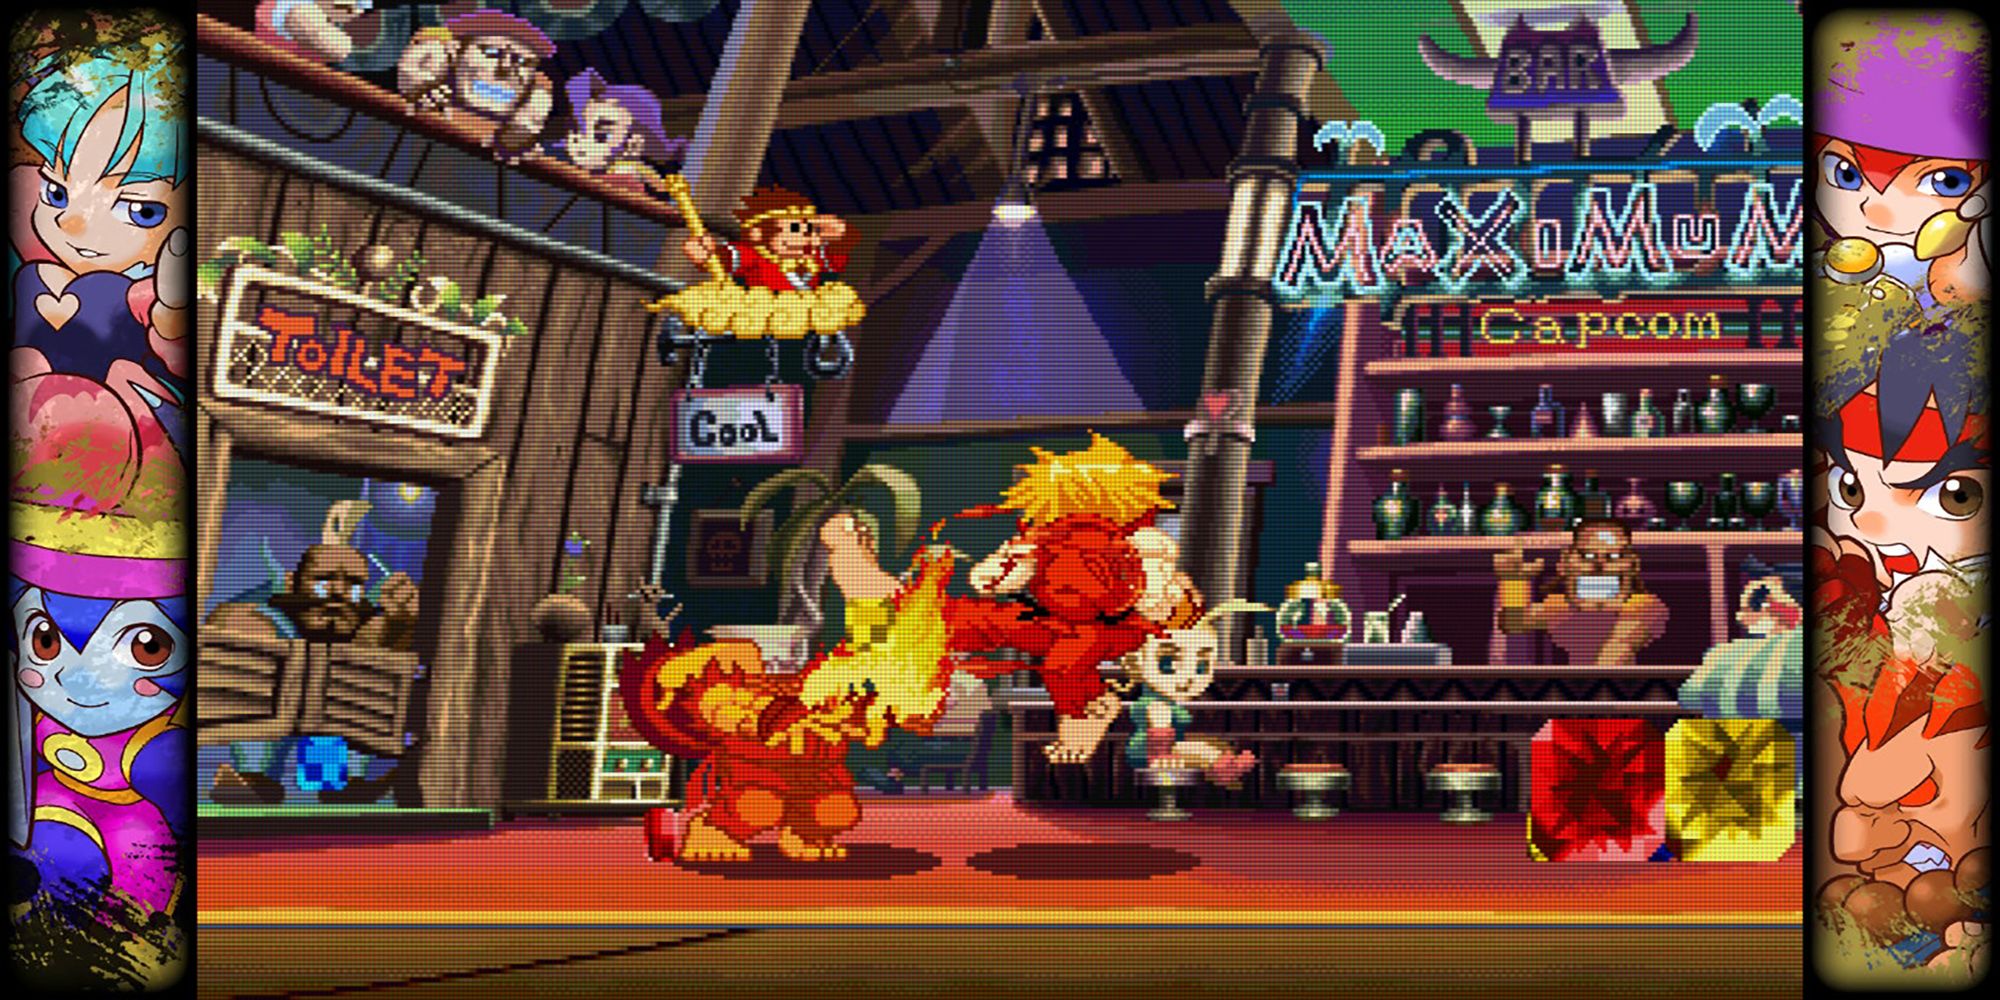 Ken hits Ryu with an amplified Tatsumaki Senpukyaku in a bar fight at DeeJay's pub, MAXIMUM, in Pocket Fighter, a game in Capcom Fighting Collection.